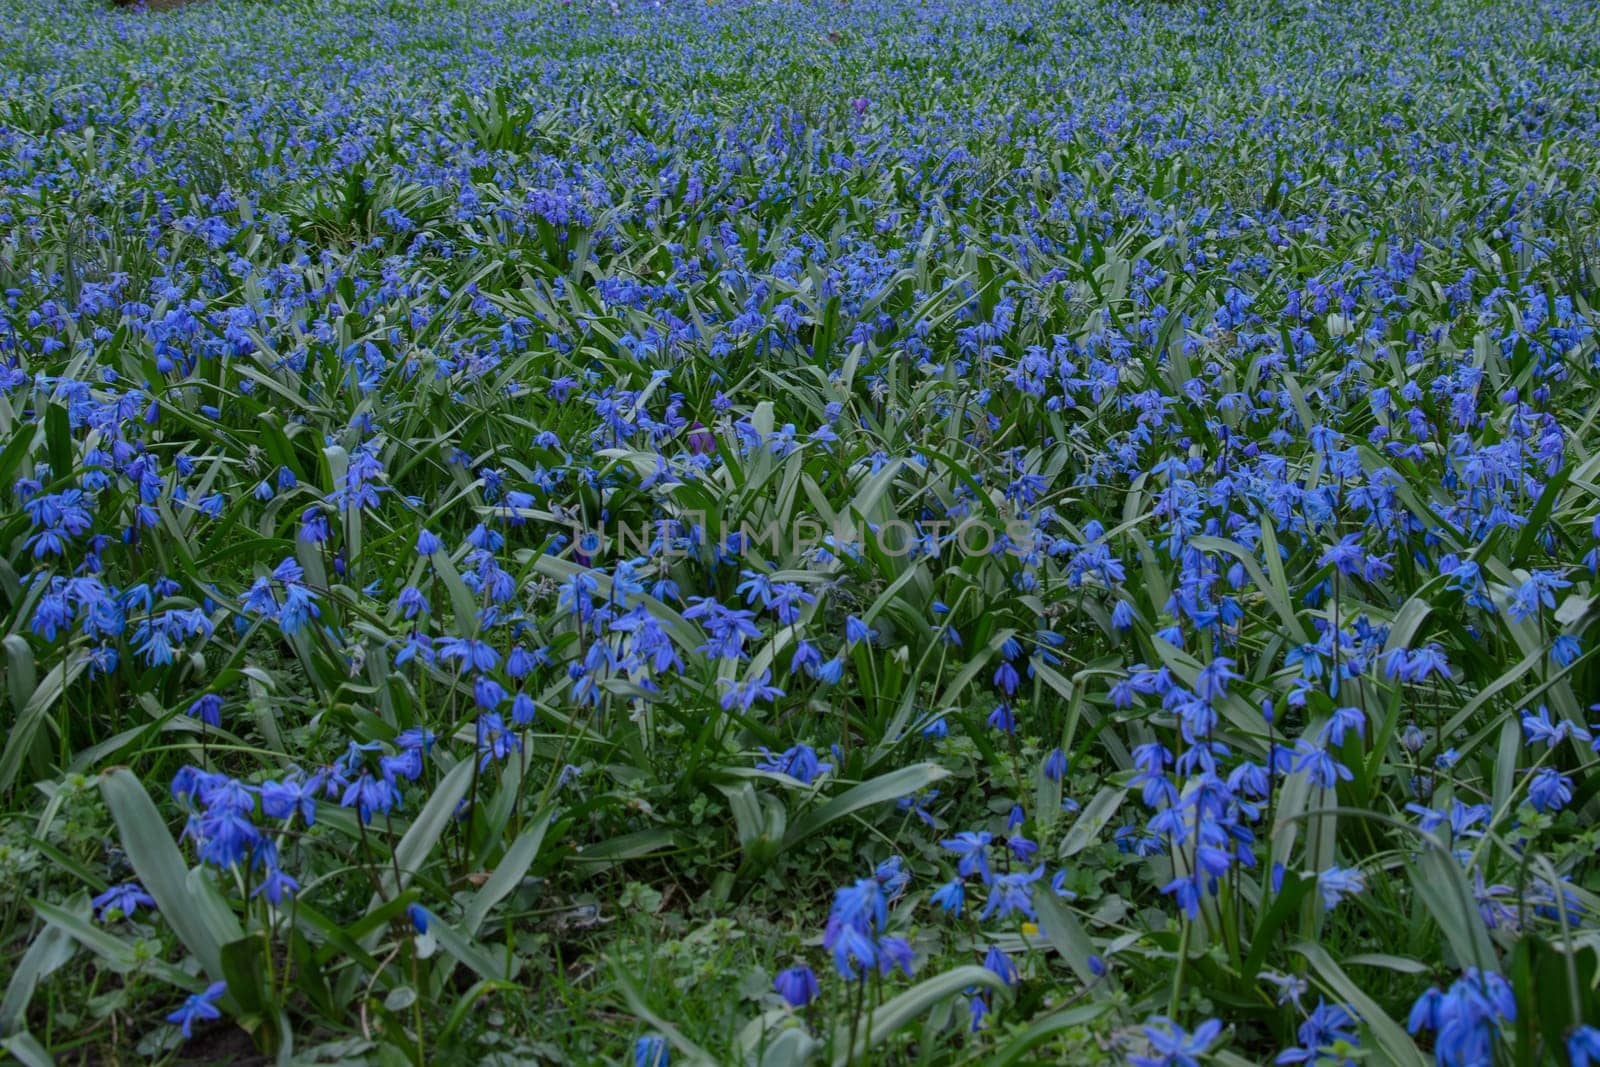 A vibrant field carpeted with bluebell flowers in full bloom. The flowers sway gently in the breeze, creating a sea of blue.